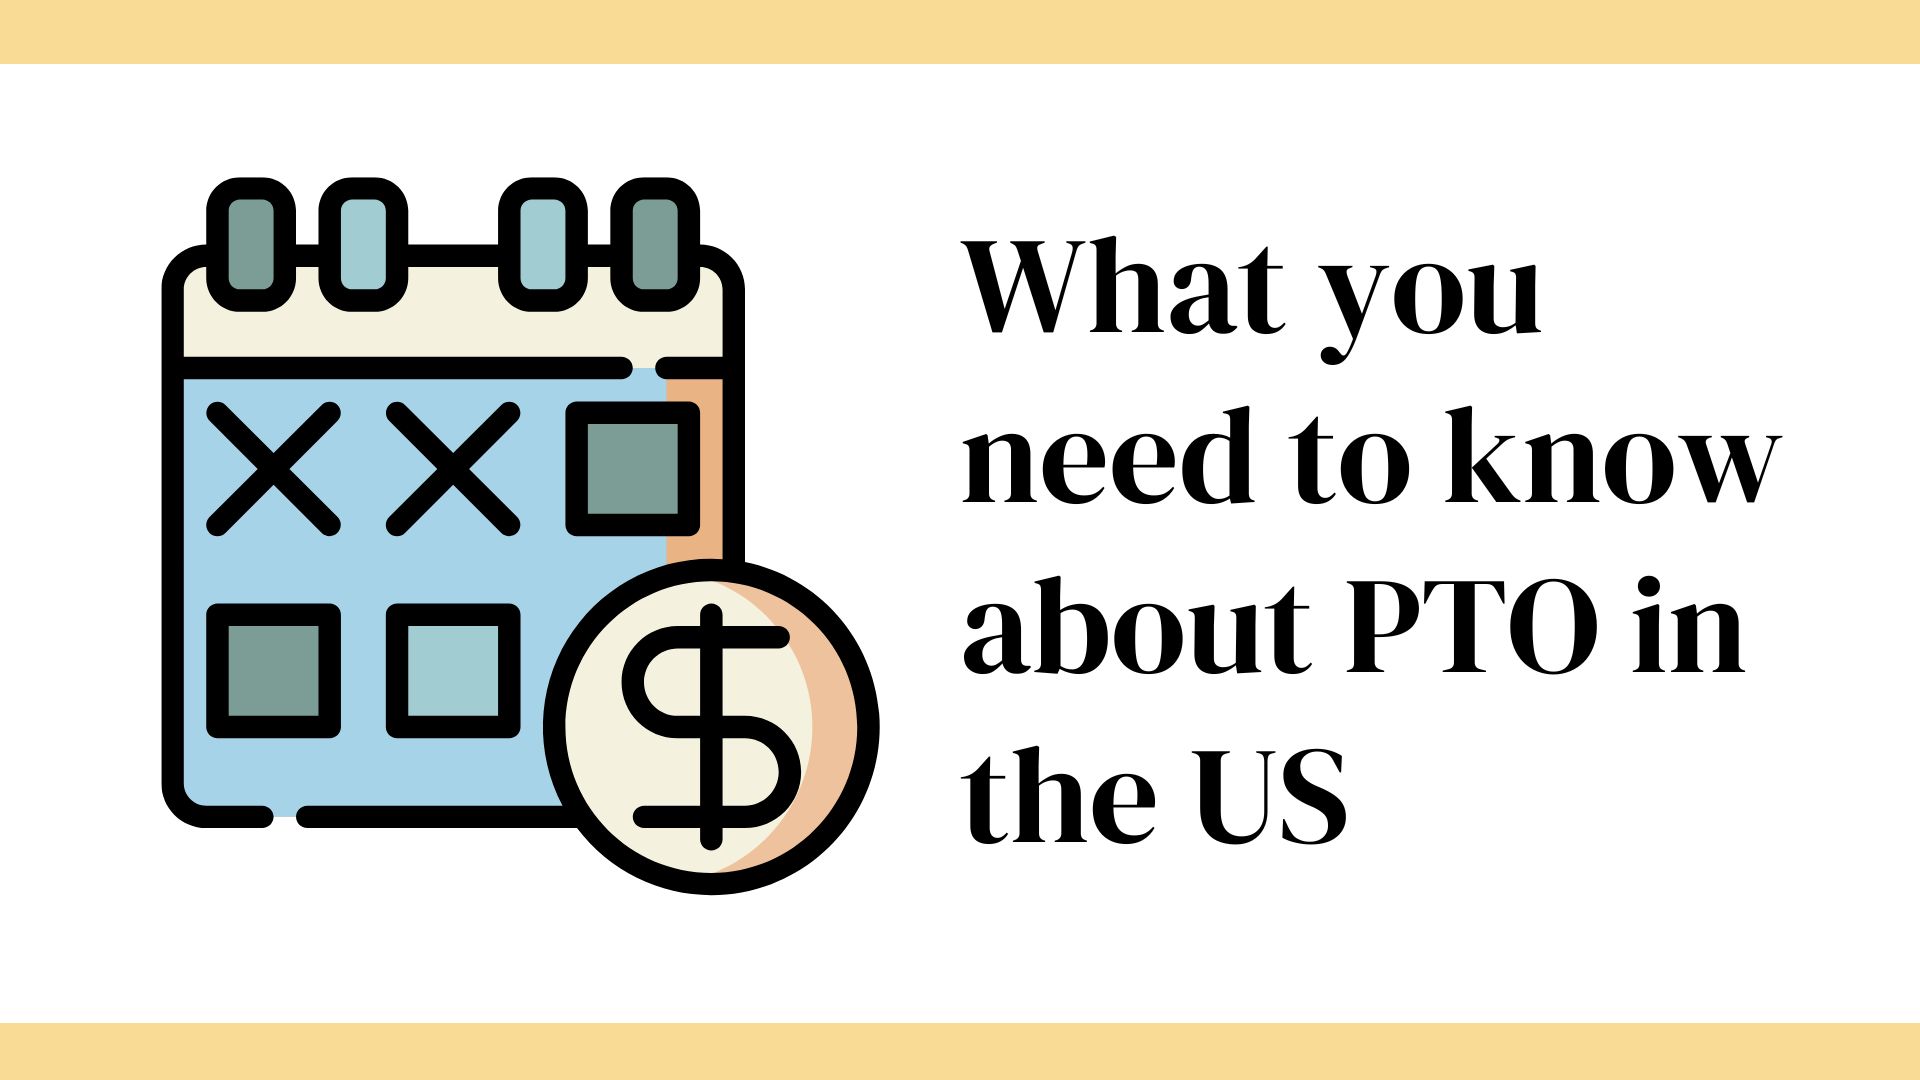 What you need to know about PTO in the US